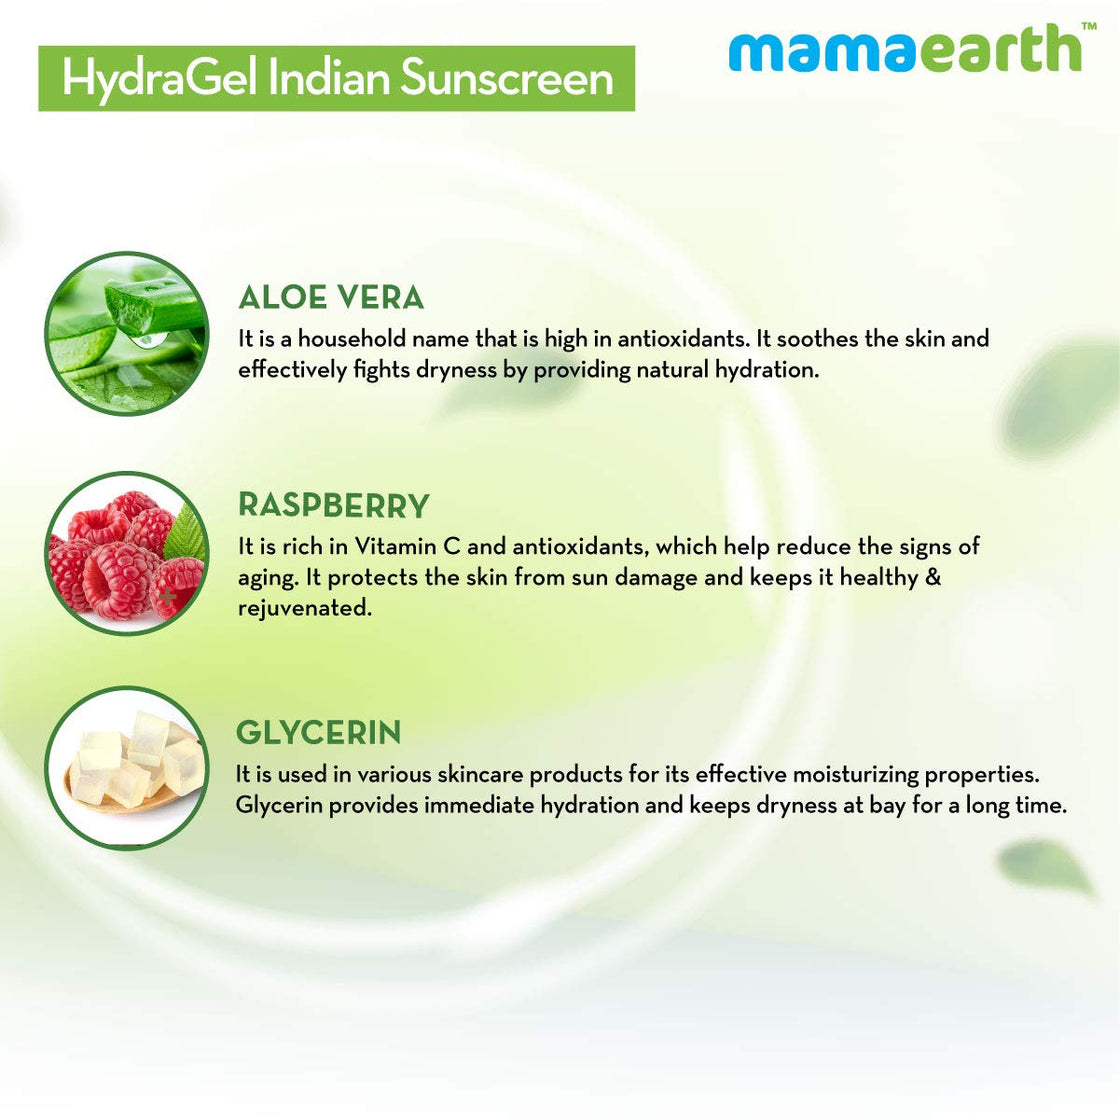 Mamaearth Hydragel Indian Sunscreen Spf 50, With Aloe Vera & Raspberry, For Sun Protection-8